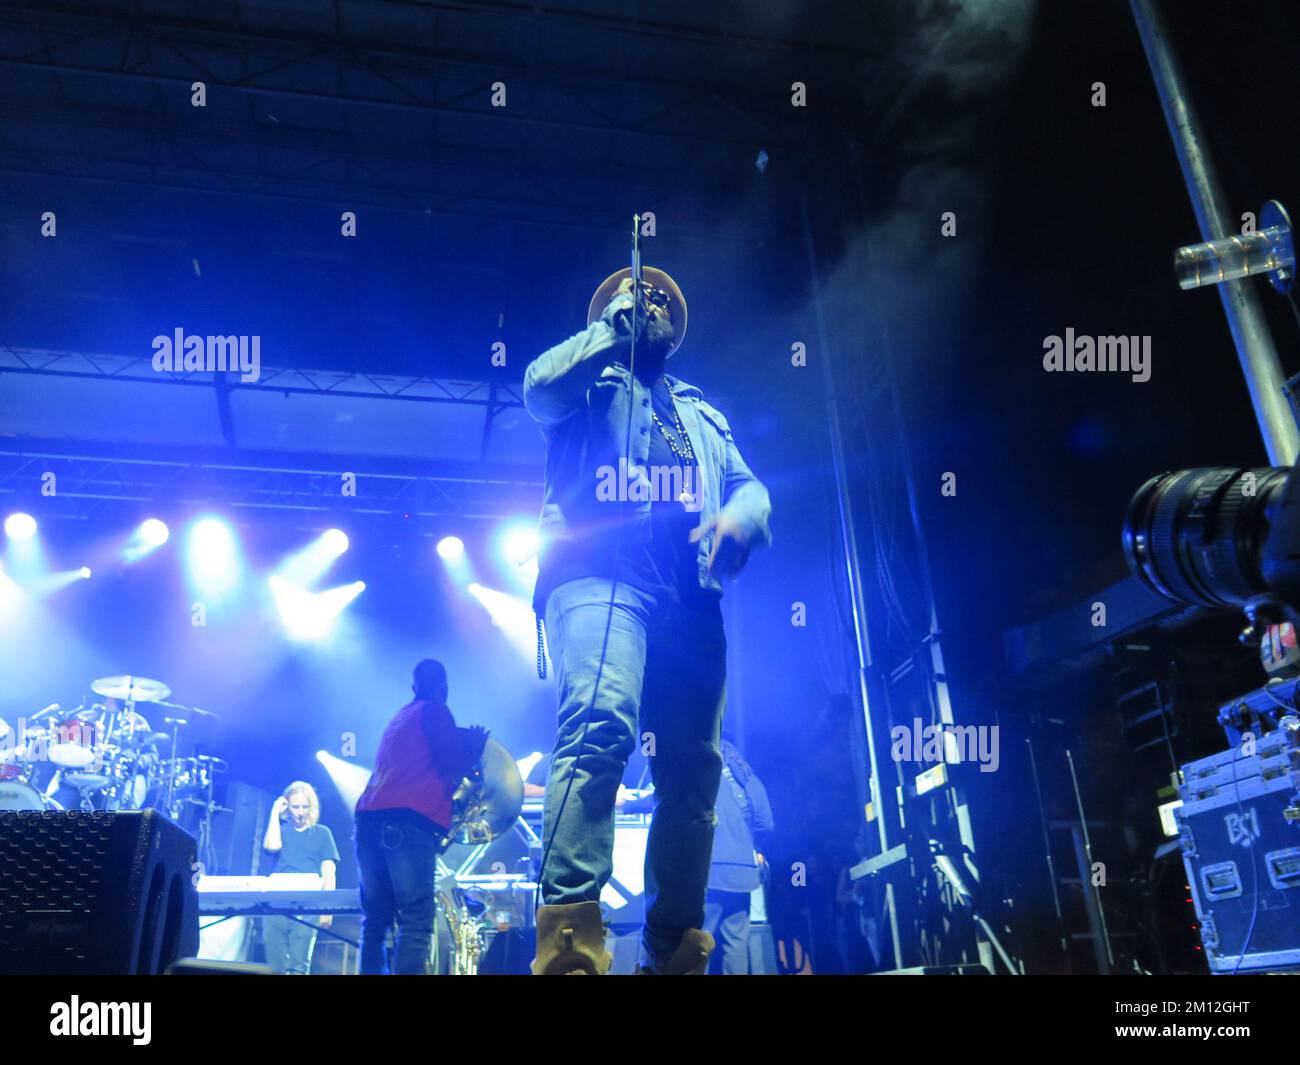 Cayuga South Festival - The Roots in concert Stock Photo - Alamy